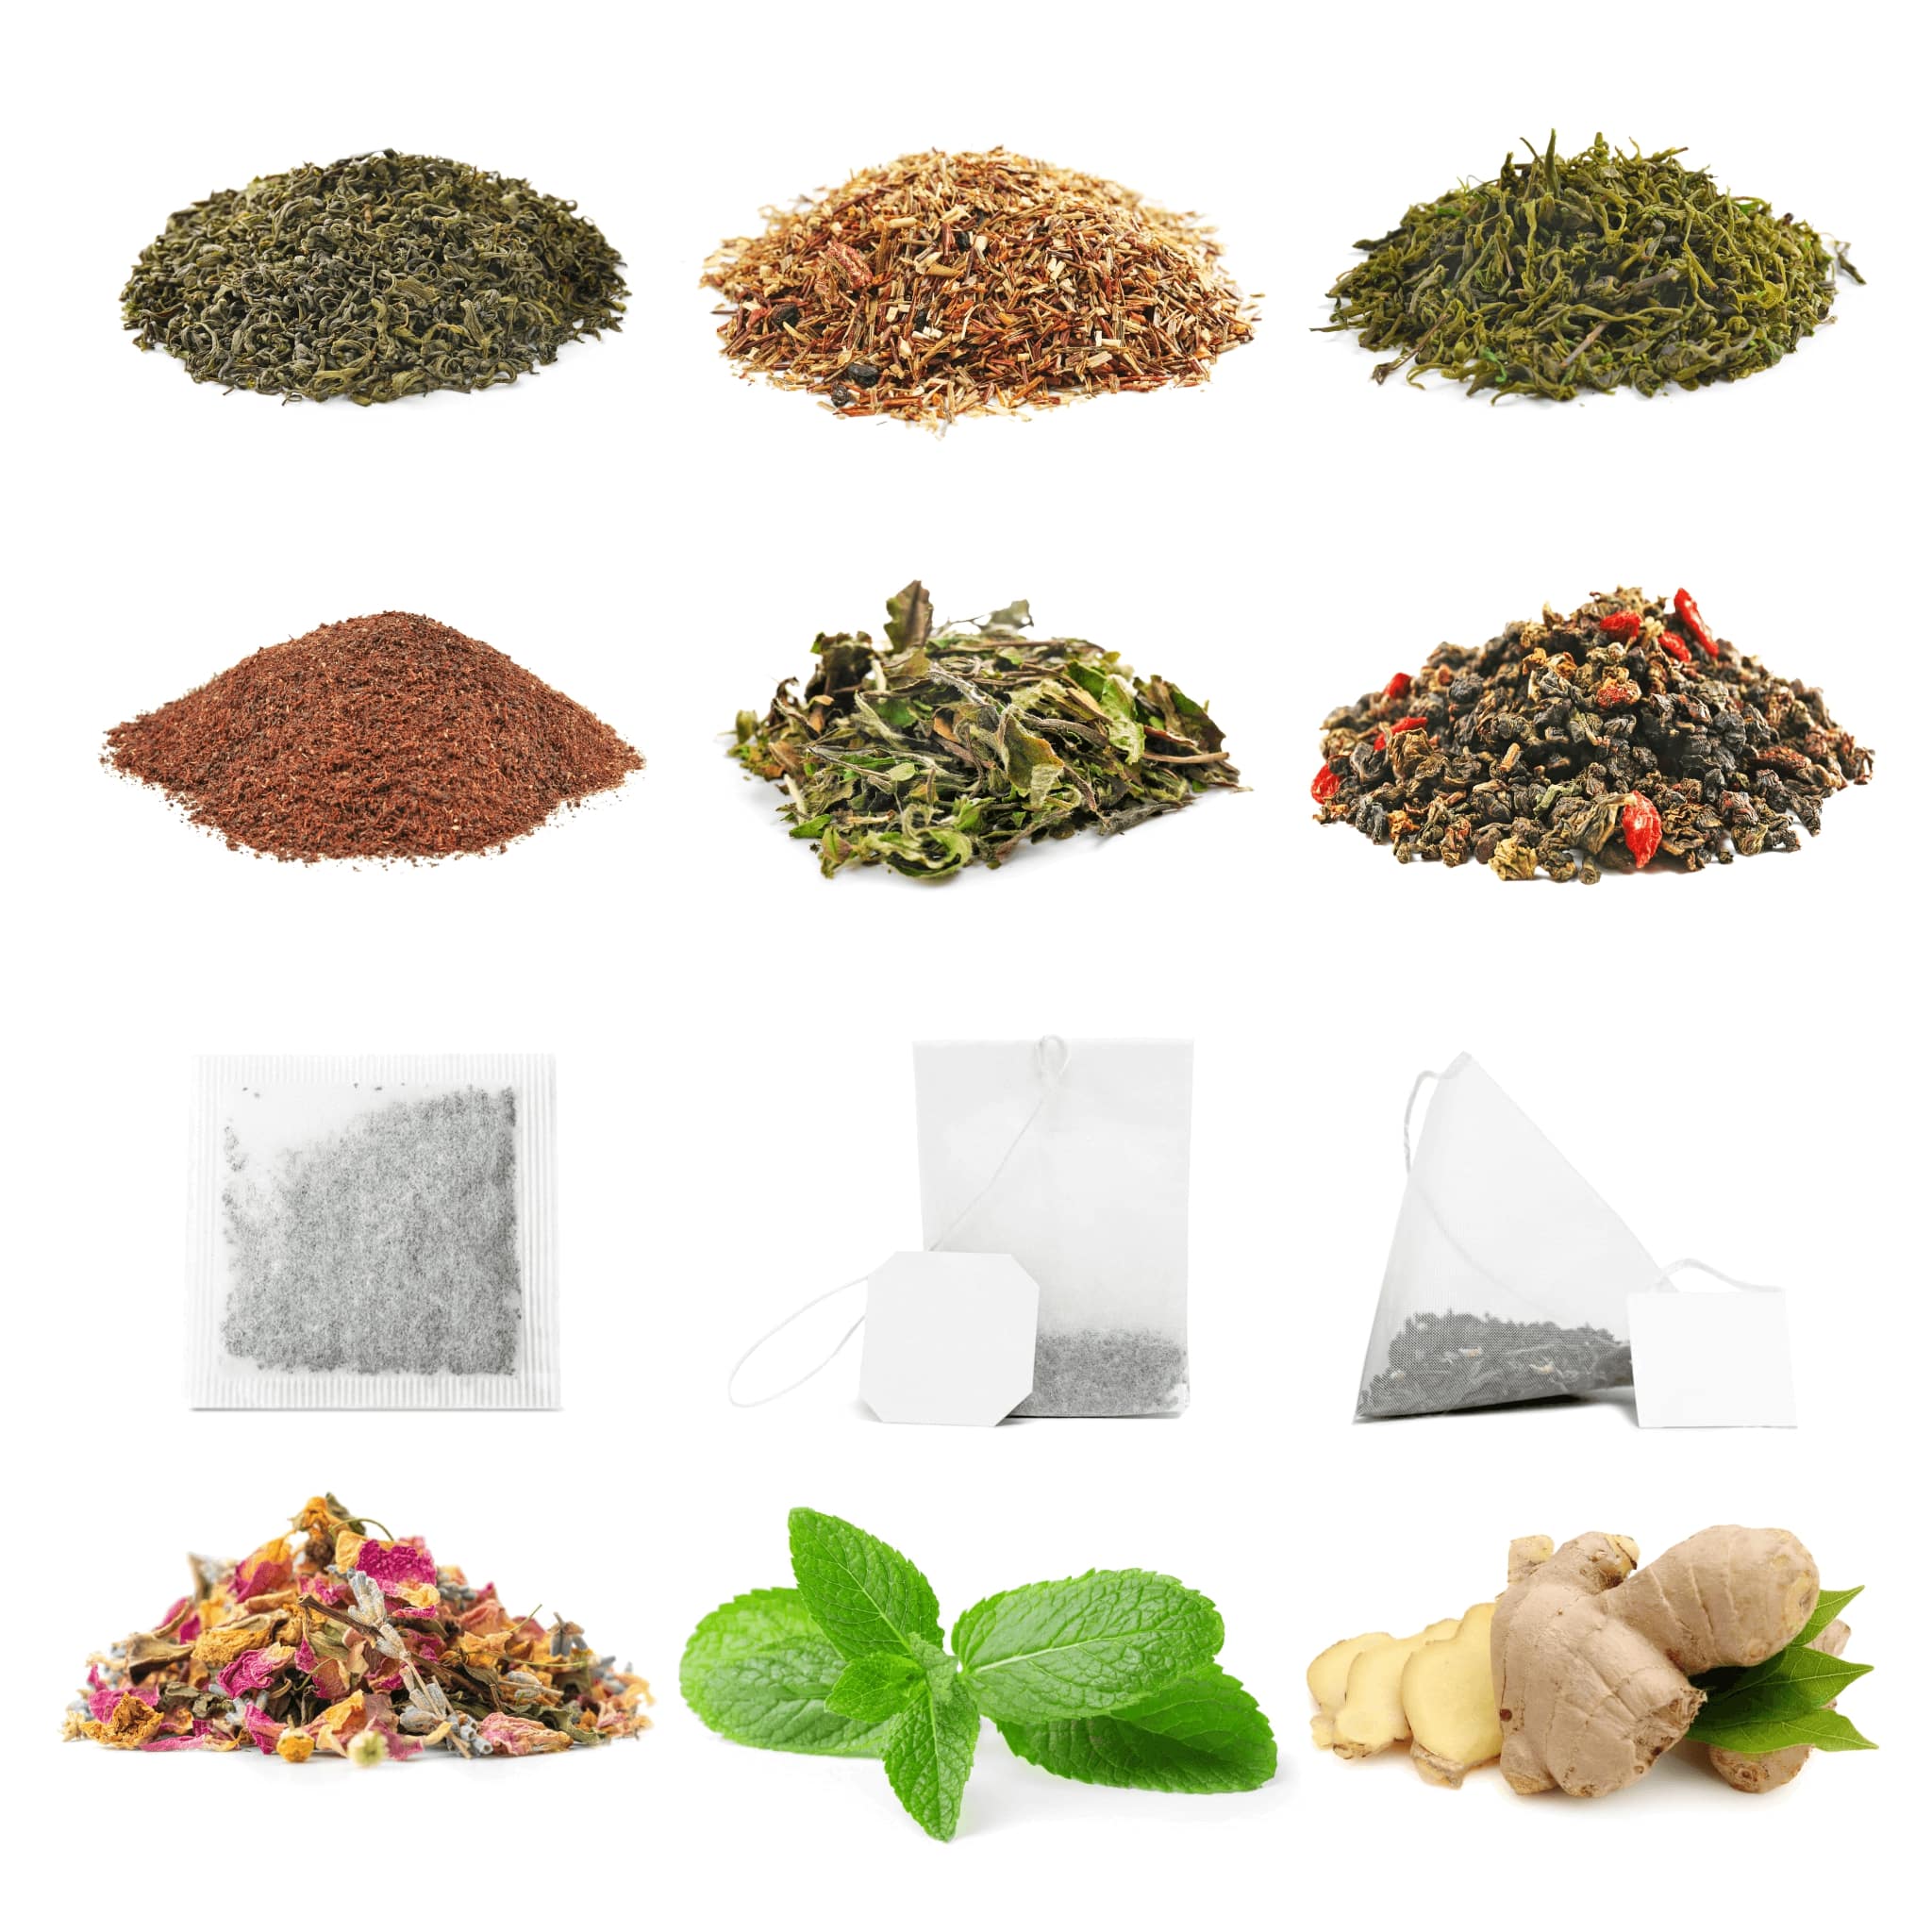 Lineup in a 3x4 grid of different types of loose leaf tea, tea bags and fresh herbs